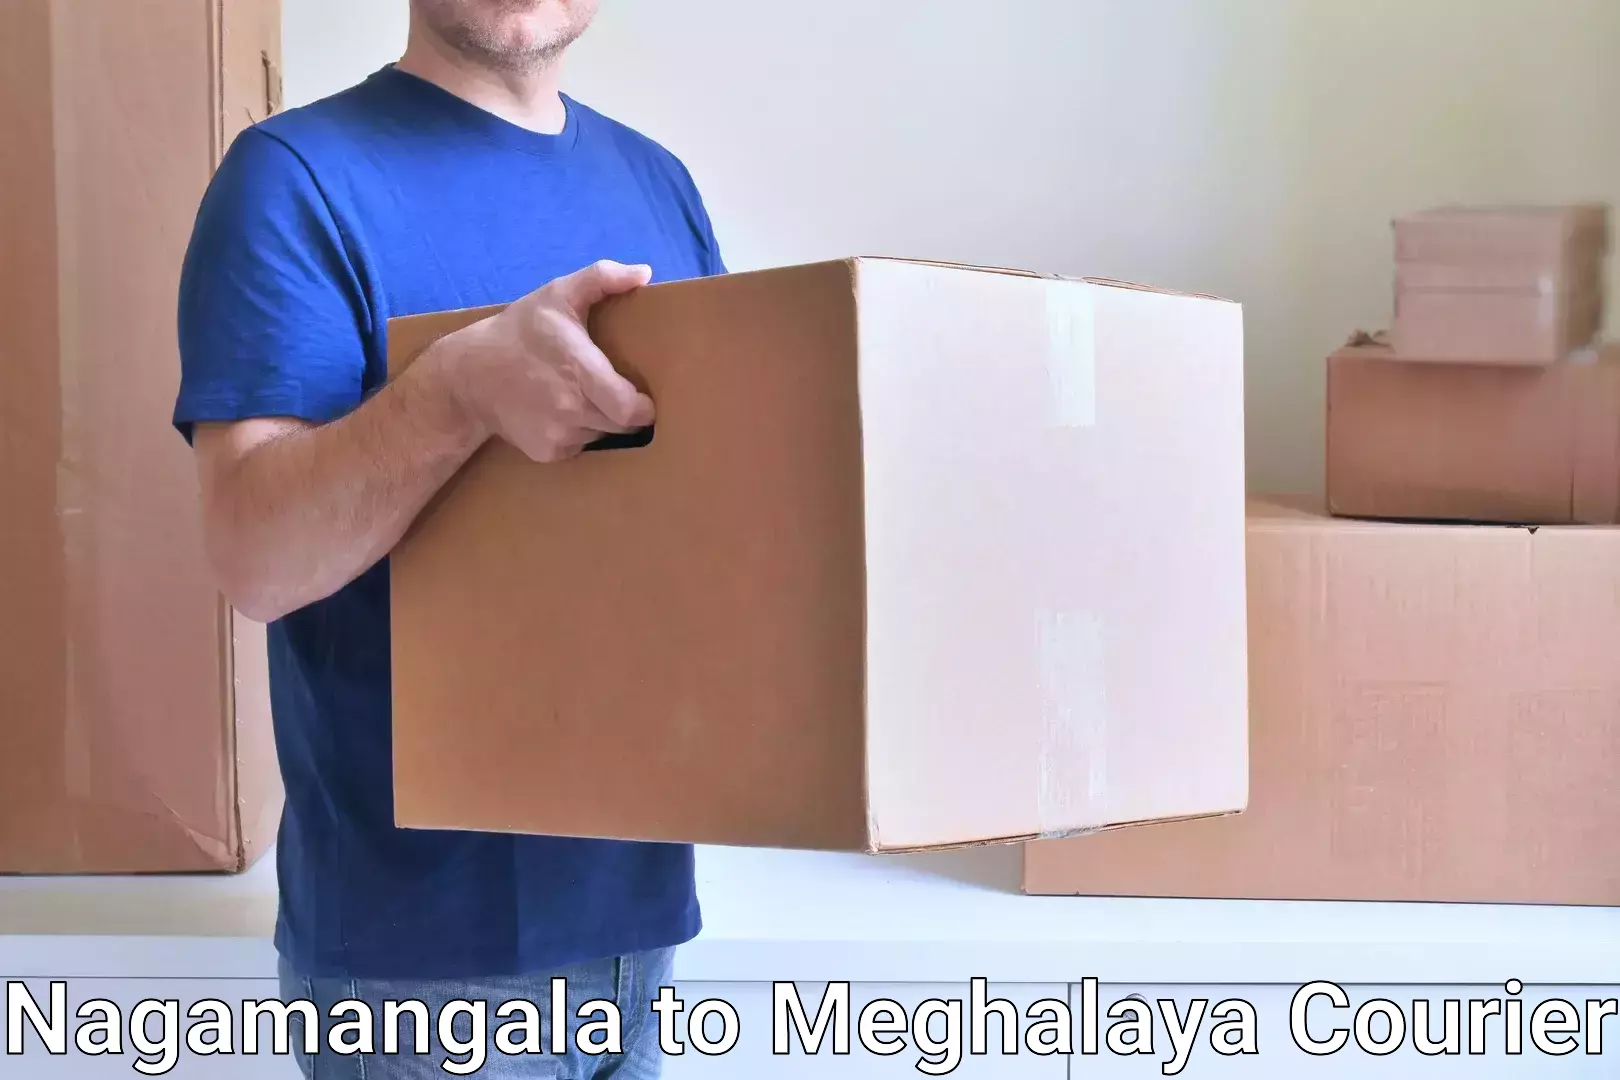 Global courier networks Nagamangala to Jaintia Hills